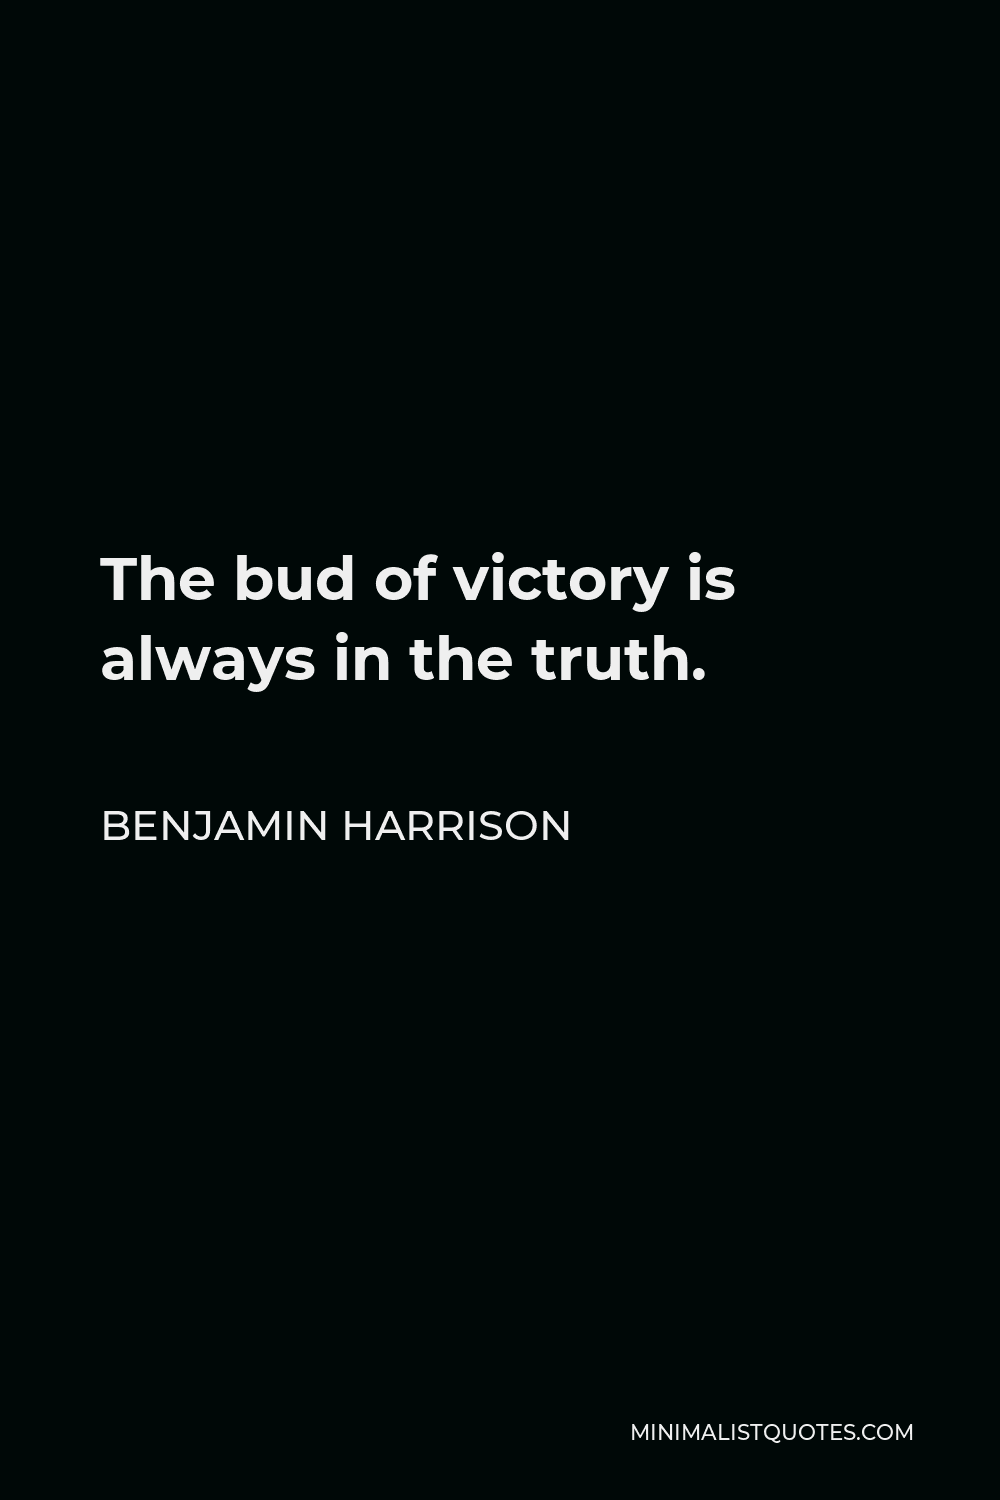 Benjamin Harrison Quote - The bud of victory is always in the truth.